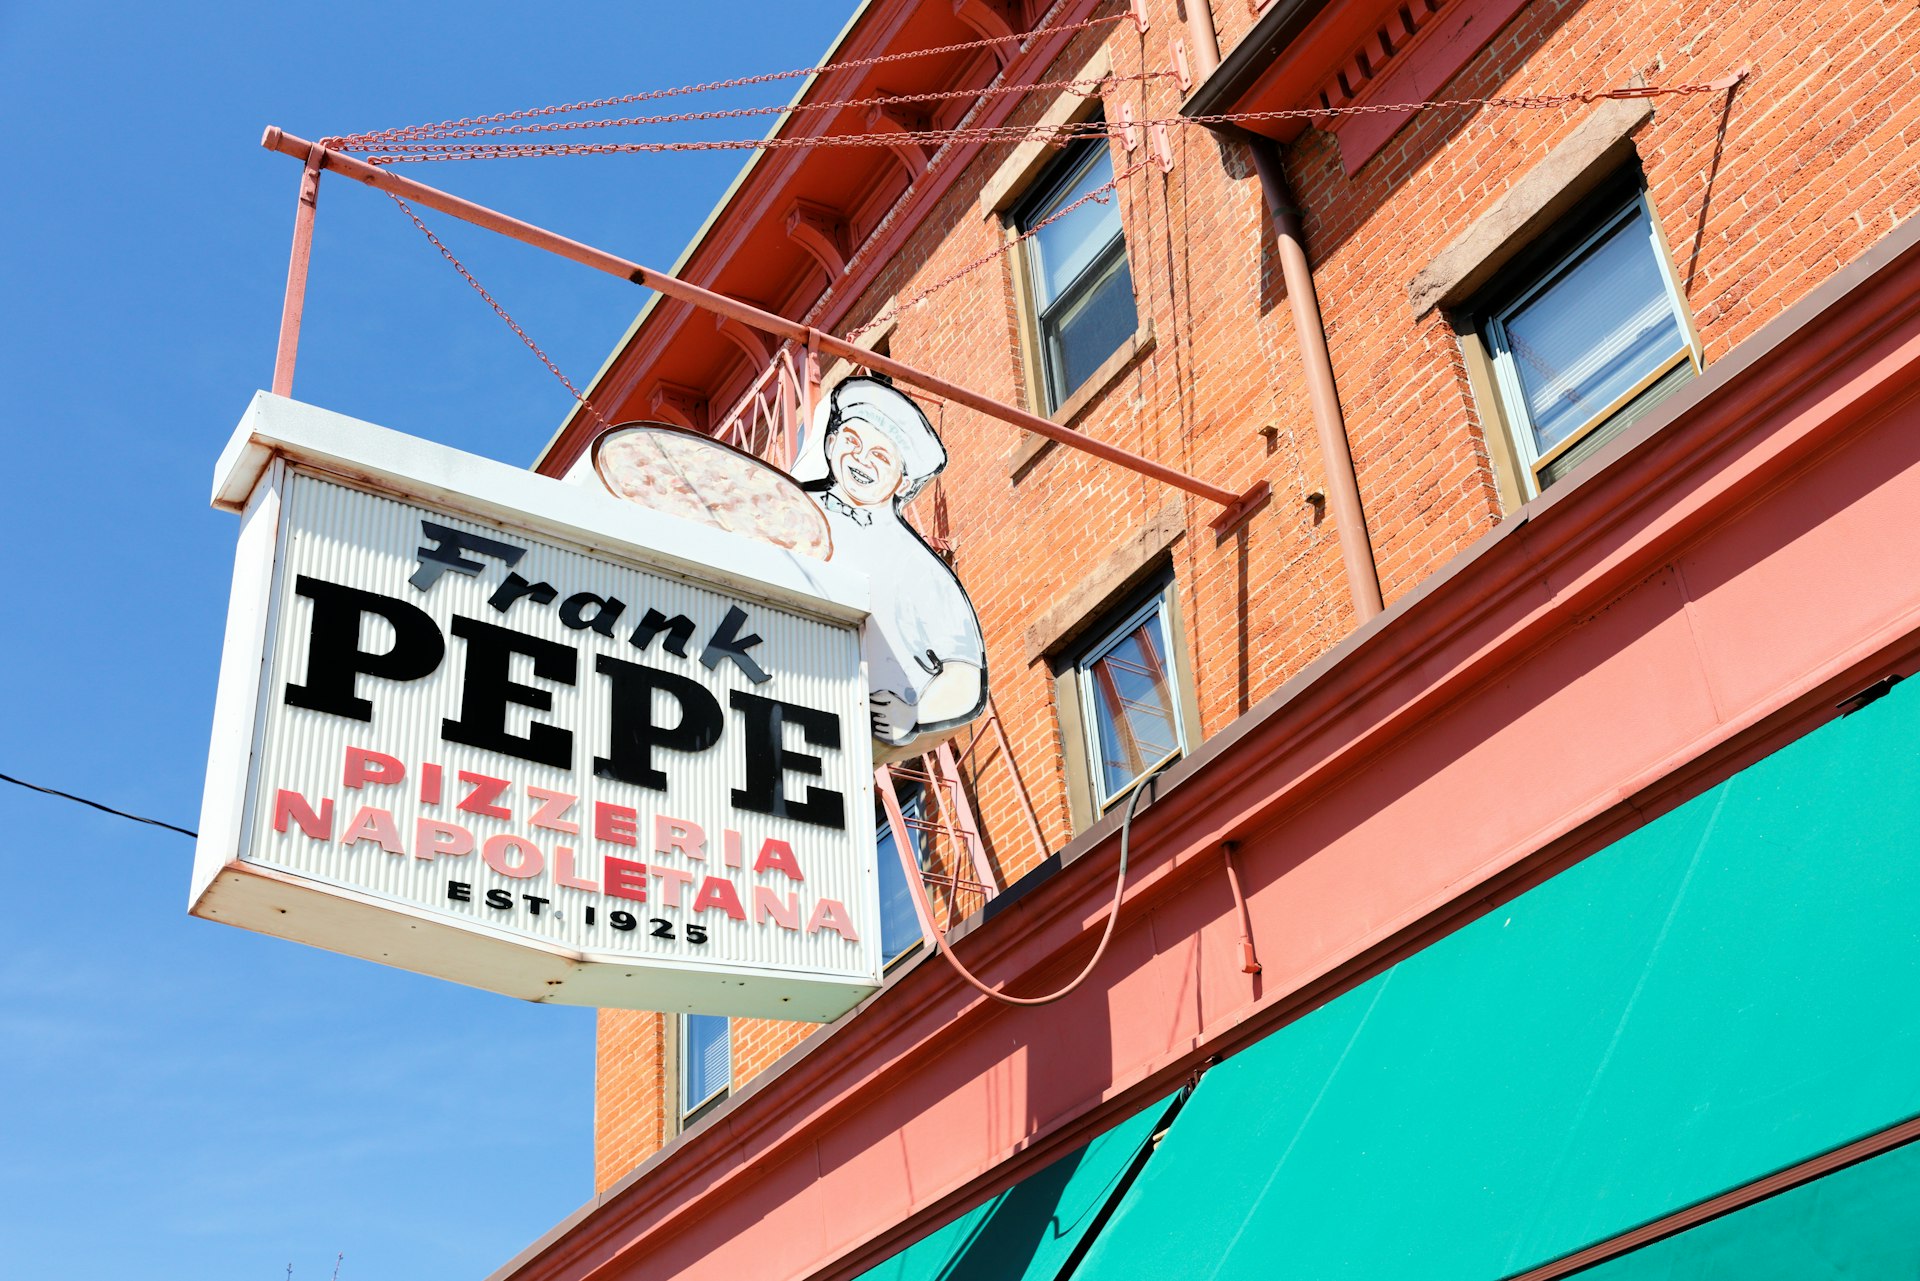 The exterior of a pizza restaurant  with a sign showing a chef that says "Frank Pepe pizza Neapolitano est 1925"